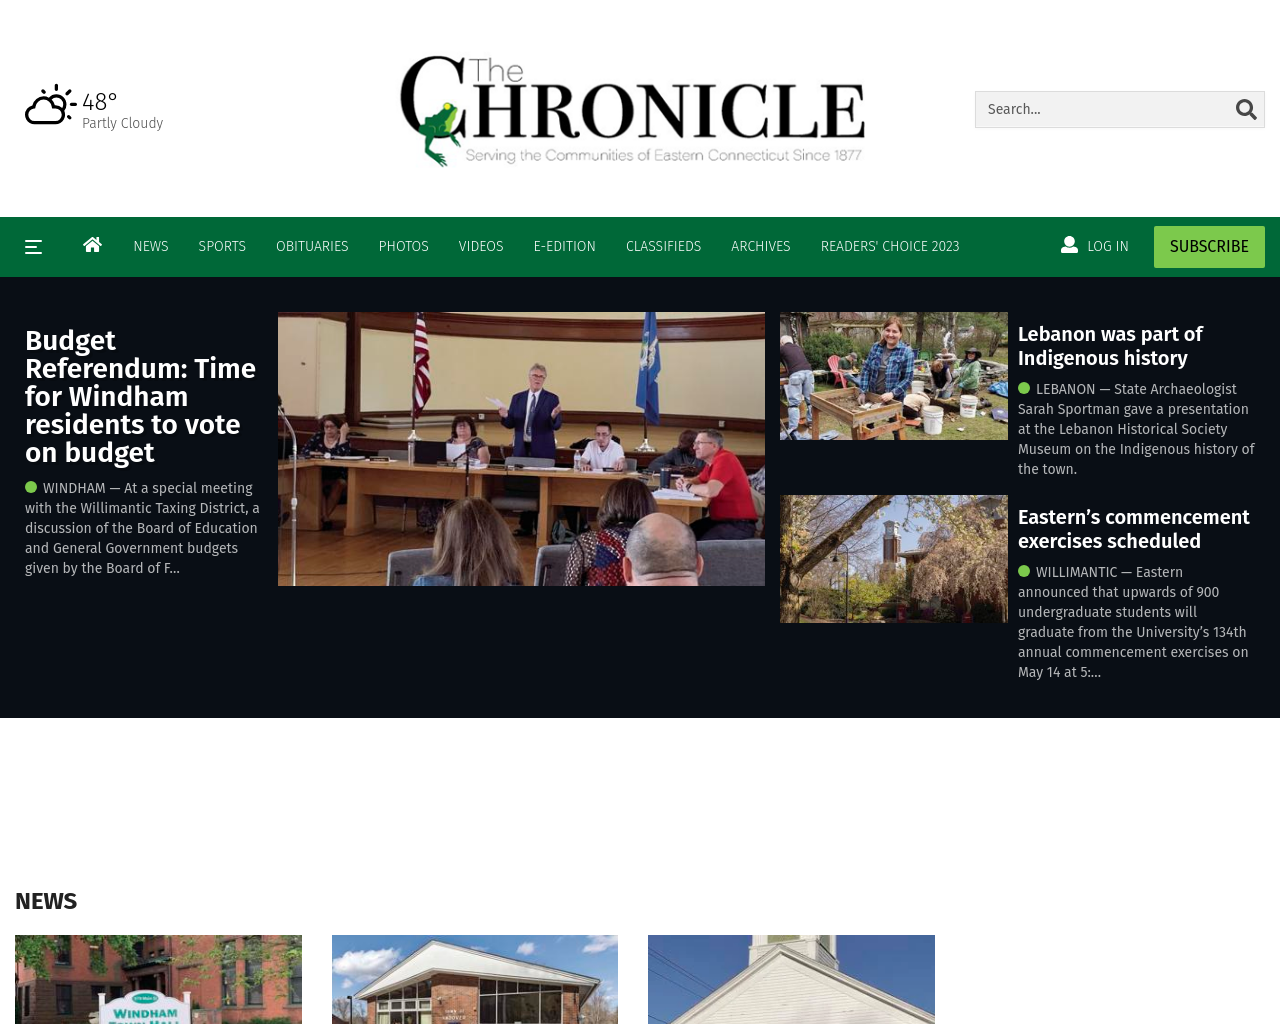 thechronicle.com